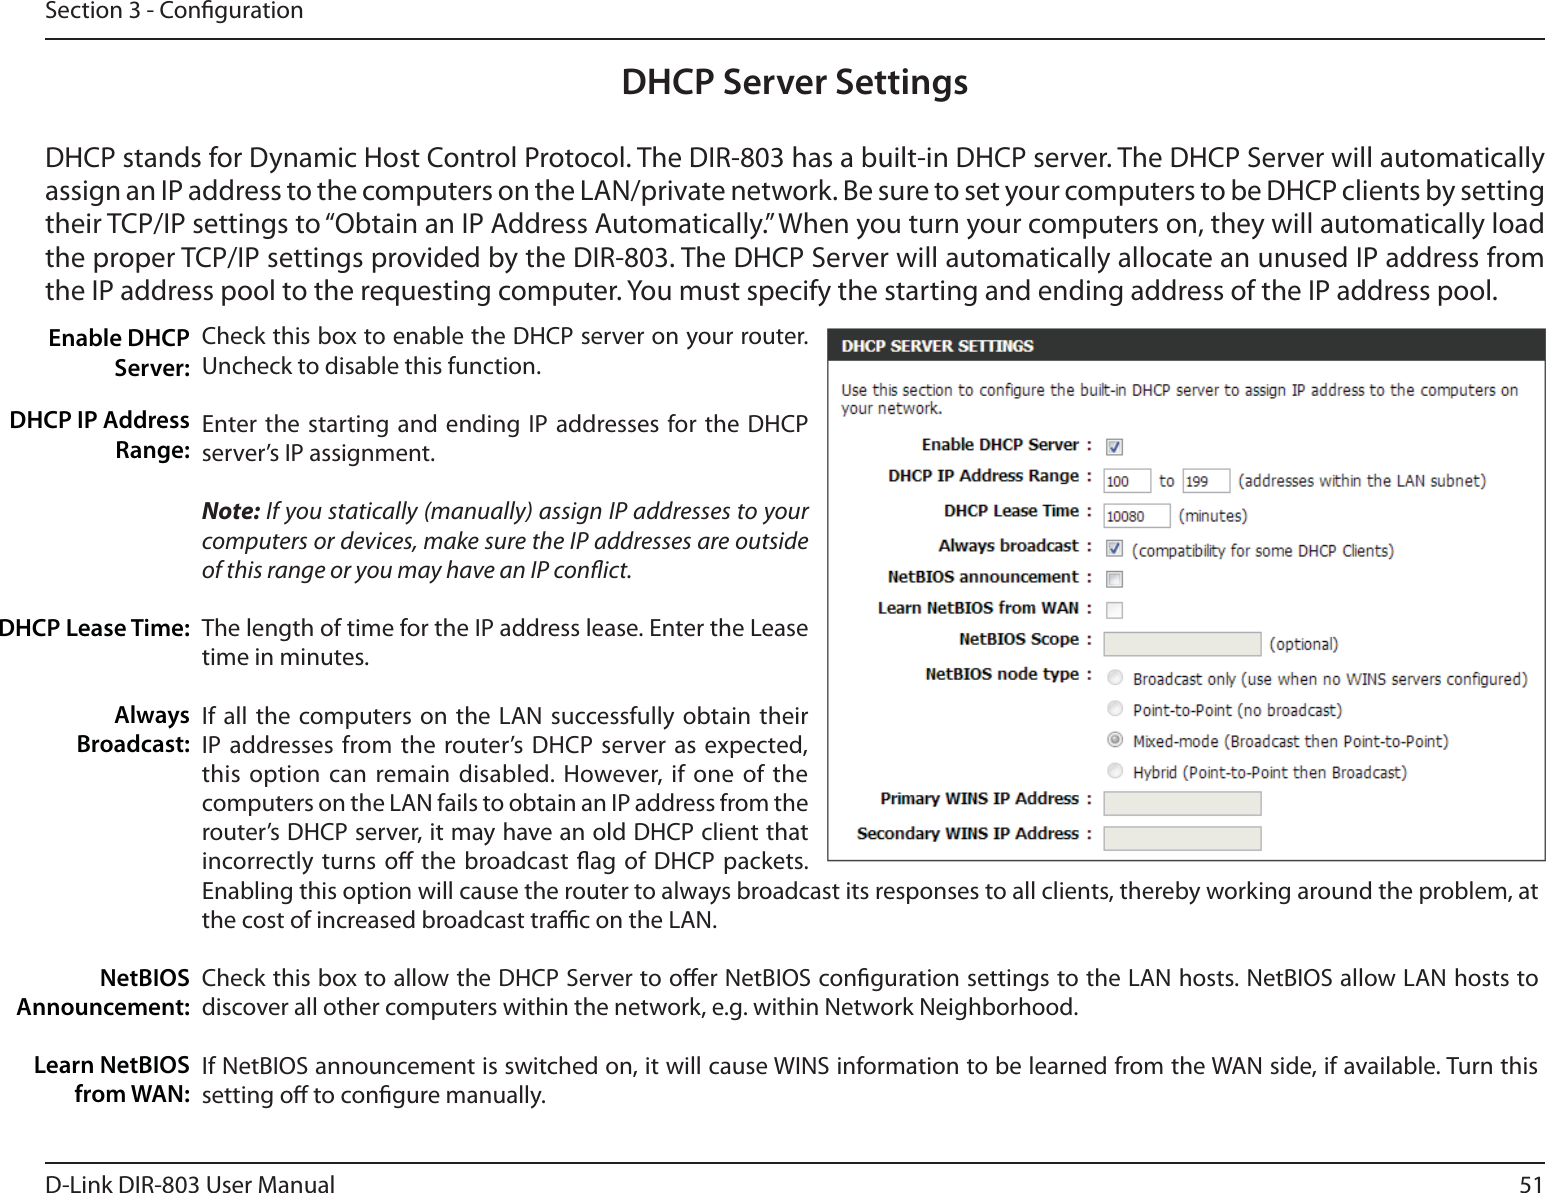 51D-Link DIR-803 User ManualSection 3 - CongurationDHCP Server SettingsDHCP stands for Dynamic Host Control Protocol. The DIR-803 has a built-in DHCP server. The DHCP Server will automatically assign an IP address to the computers on the LAN/private network. Be sure to set your computers to be DHCP clients by setting their TCP/IP settings to “Obtain an IP Address Automatically.” When you turn your computers on, they will automatically load the proper TCP/IP settings provided by the DIR-803. The DHCP Server will automatically allocate an unused IP address from the IP address pool to the requesting computer. You must specify the starting and ending address of the IP address pool.Check this box to enable the DHCP server on your router. Uncheck to disable this function.Enter the starting and ending IP addresses for the DHCP server’s IP assignment.Note: If you statically (manually) assign IP addresses to your computers or devices, make sure the IP addresses are outside of this range or you may have an IP conict. The length of time for the IP address lease. Enter the Lease time in minutes.If all the computers on the LAN successfully obtain their IP addresses from the router’s DHCP server as expected, this option can remain disabled. However, if one of the computers on the LAN fails to obtain an IP address from the router’s DHCP server, it may have an old DHCP client that incorrectly turns o the broadcast ag of DHCP packets. Enabling this option will cause the router to always broadcast its responses to all clients, thereby working around the problem, at the cost of increased broadcast trac on the LAN.Check this box to allow the DHCP Server to oer NetBIOS conguration settings to the LAN hosts. NetBIOS allow LAN hosts to discover all other computers within the network, e.g. within Network Neighborhood.If NetBIOS announcement is switched on, it will cause WINS information to be learned from the WAN side, if available. Turn this setting o to congure manually.Enable DHCP Server:DHCP IP Address Range:DHCP Lease Time:Always Broadcast:NetBIOS Announcement:Learn NetBIOS from WAN: